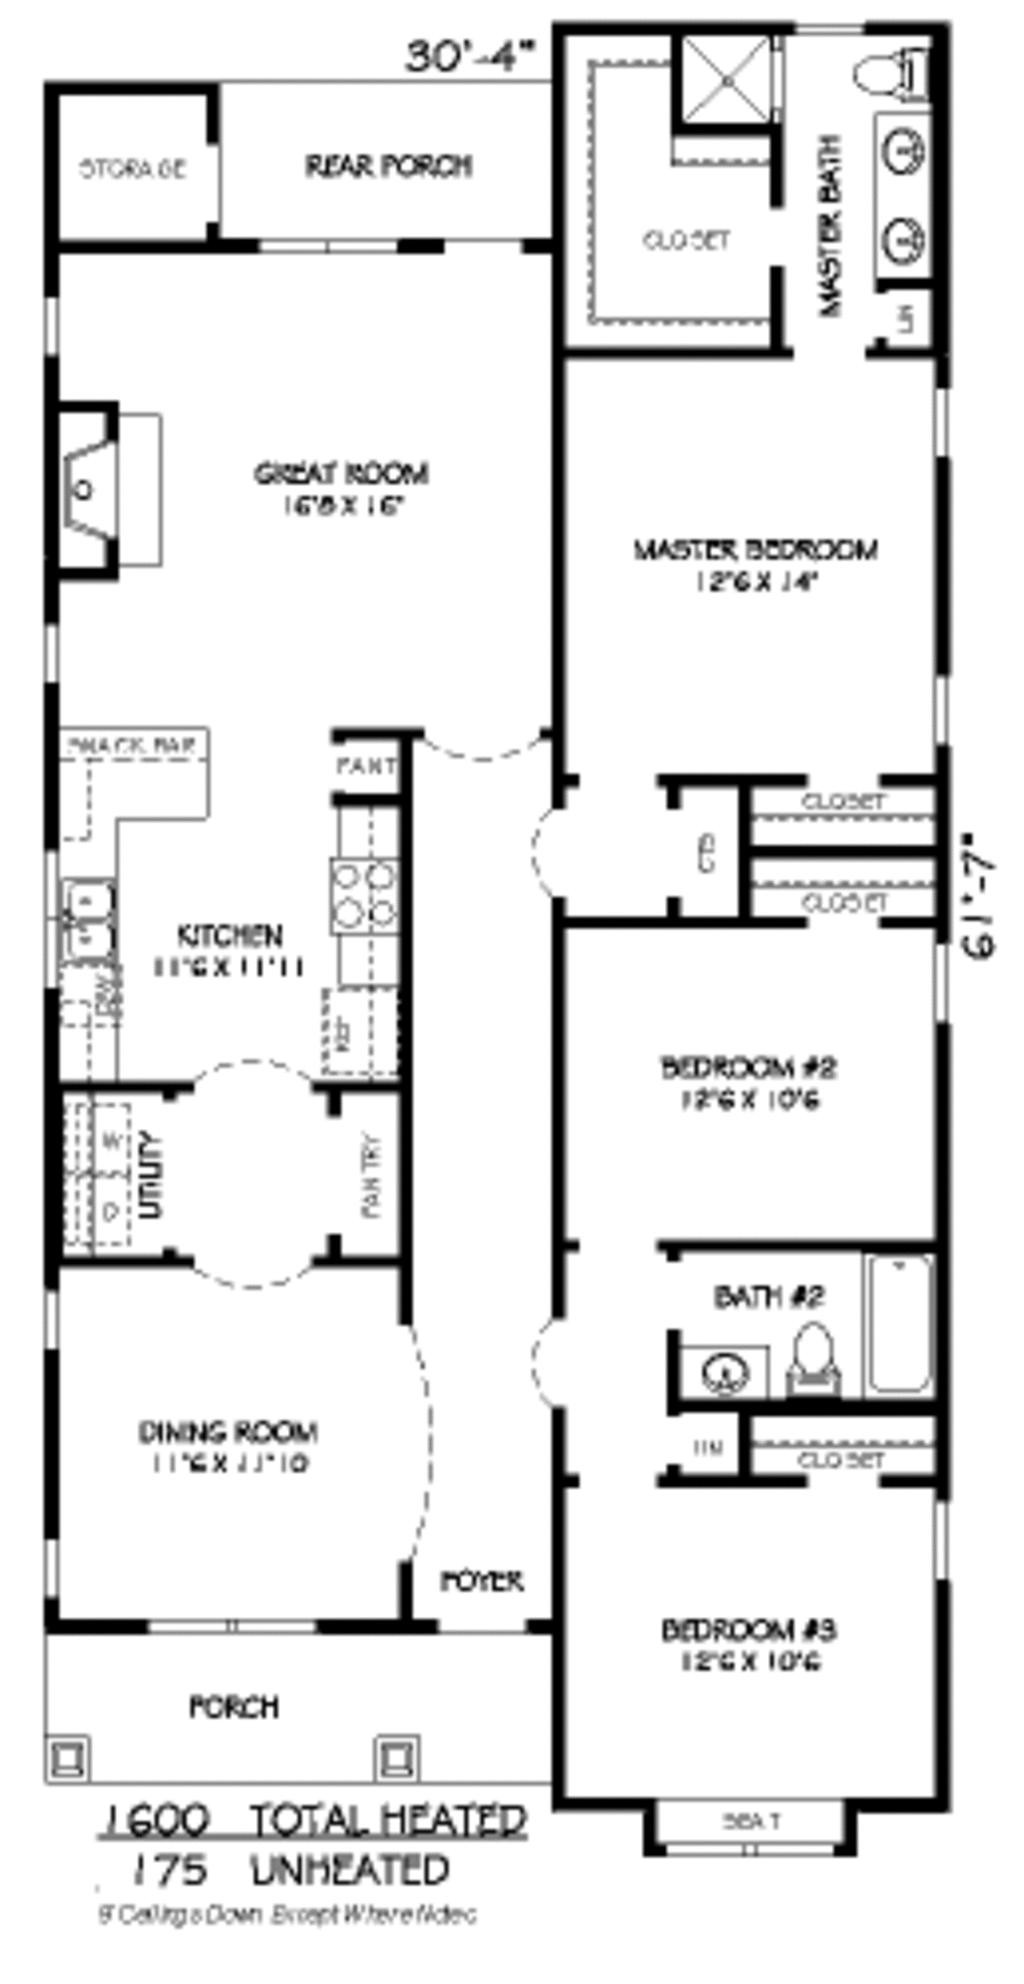 Traditional Style House Plan 3 Beds 2, 4 Bedroom House Plans 1600 Square Feet